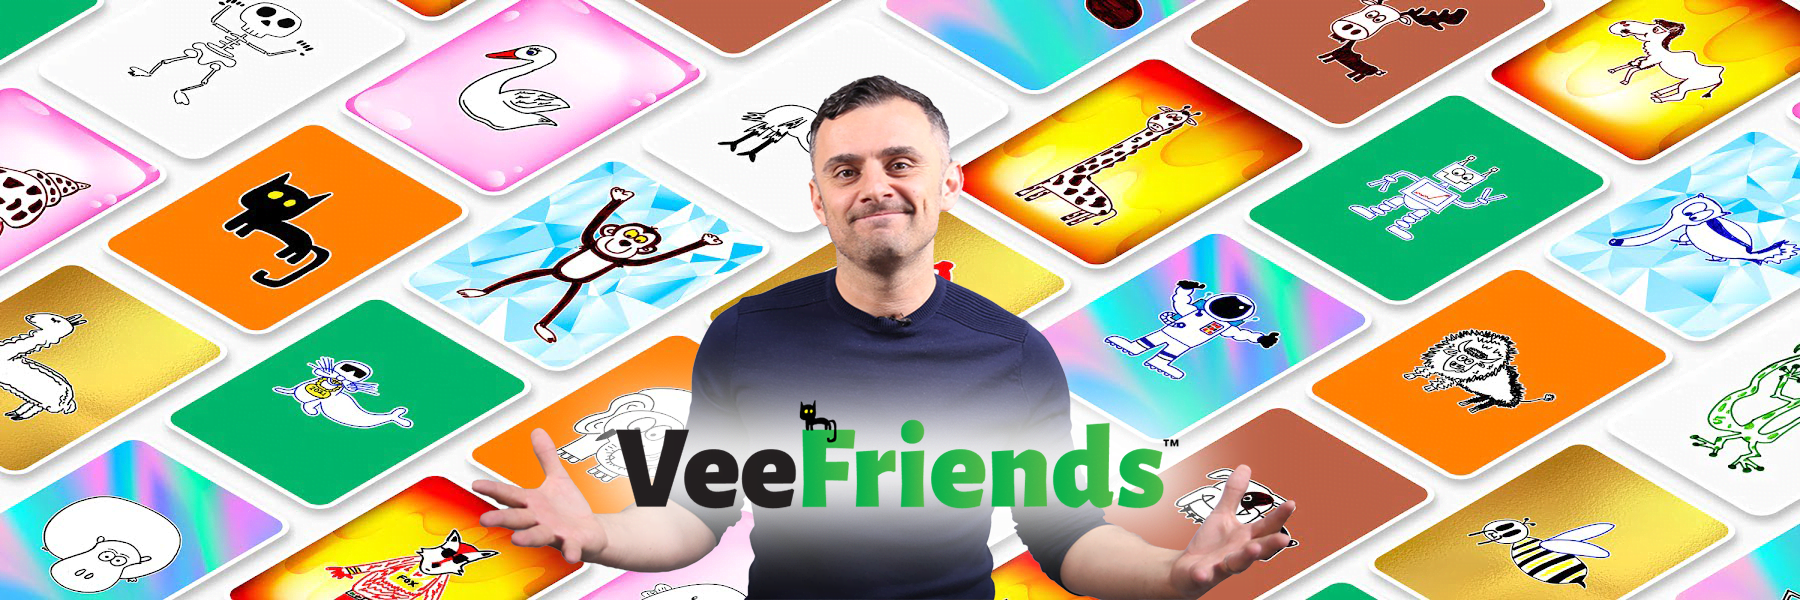 Gary Vee's NFTs: A Guide to VeeFriends and What to Know About Series 2